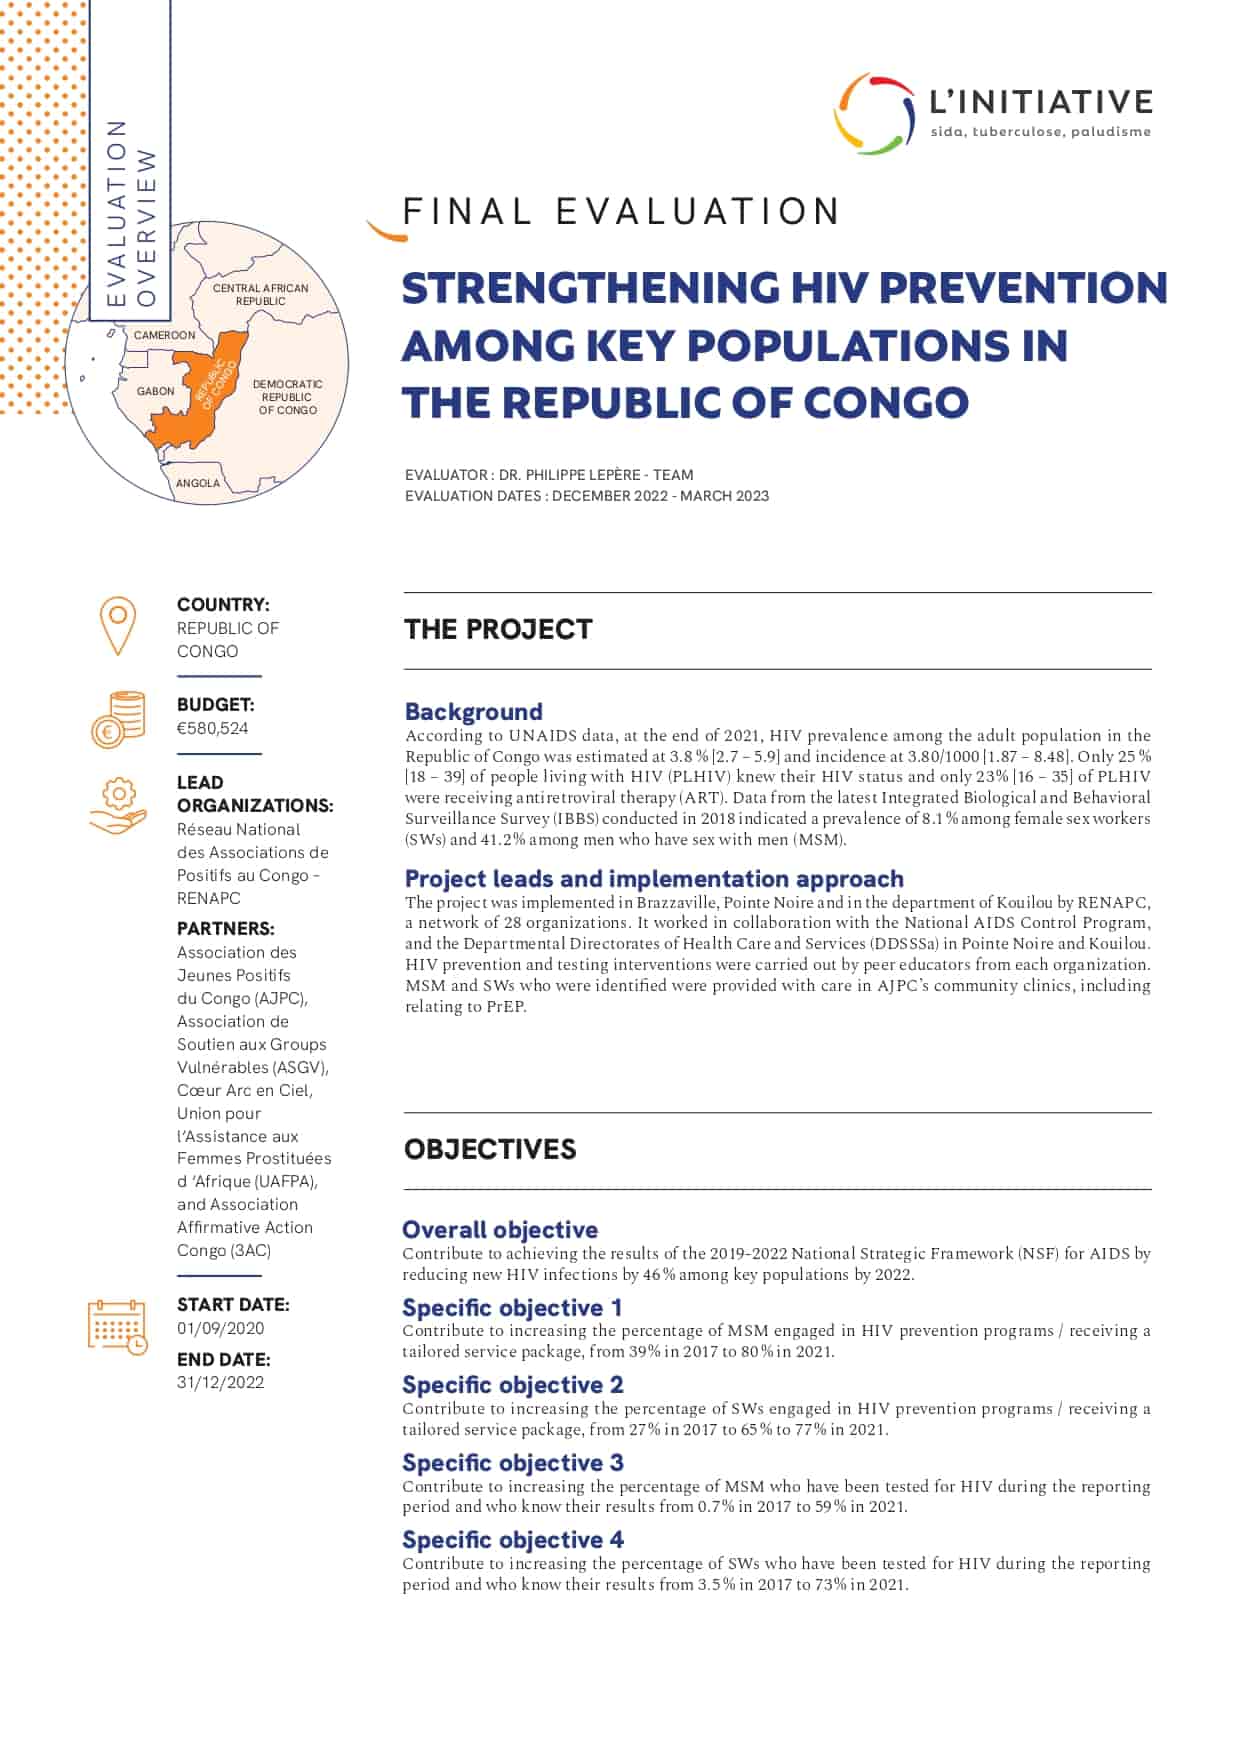 Evaluation overview - renapc - strengthening hiv prevention among key populations in the republic of congo